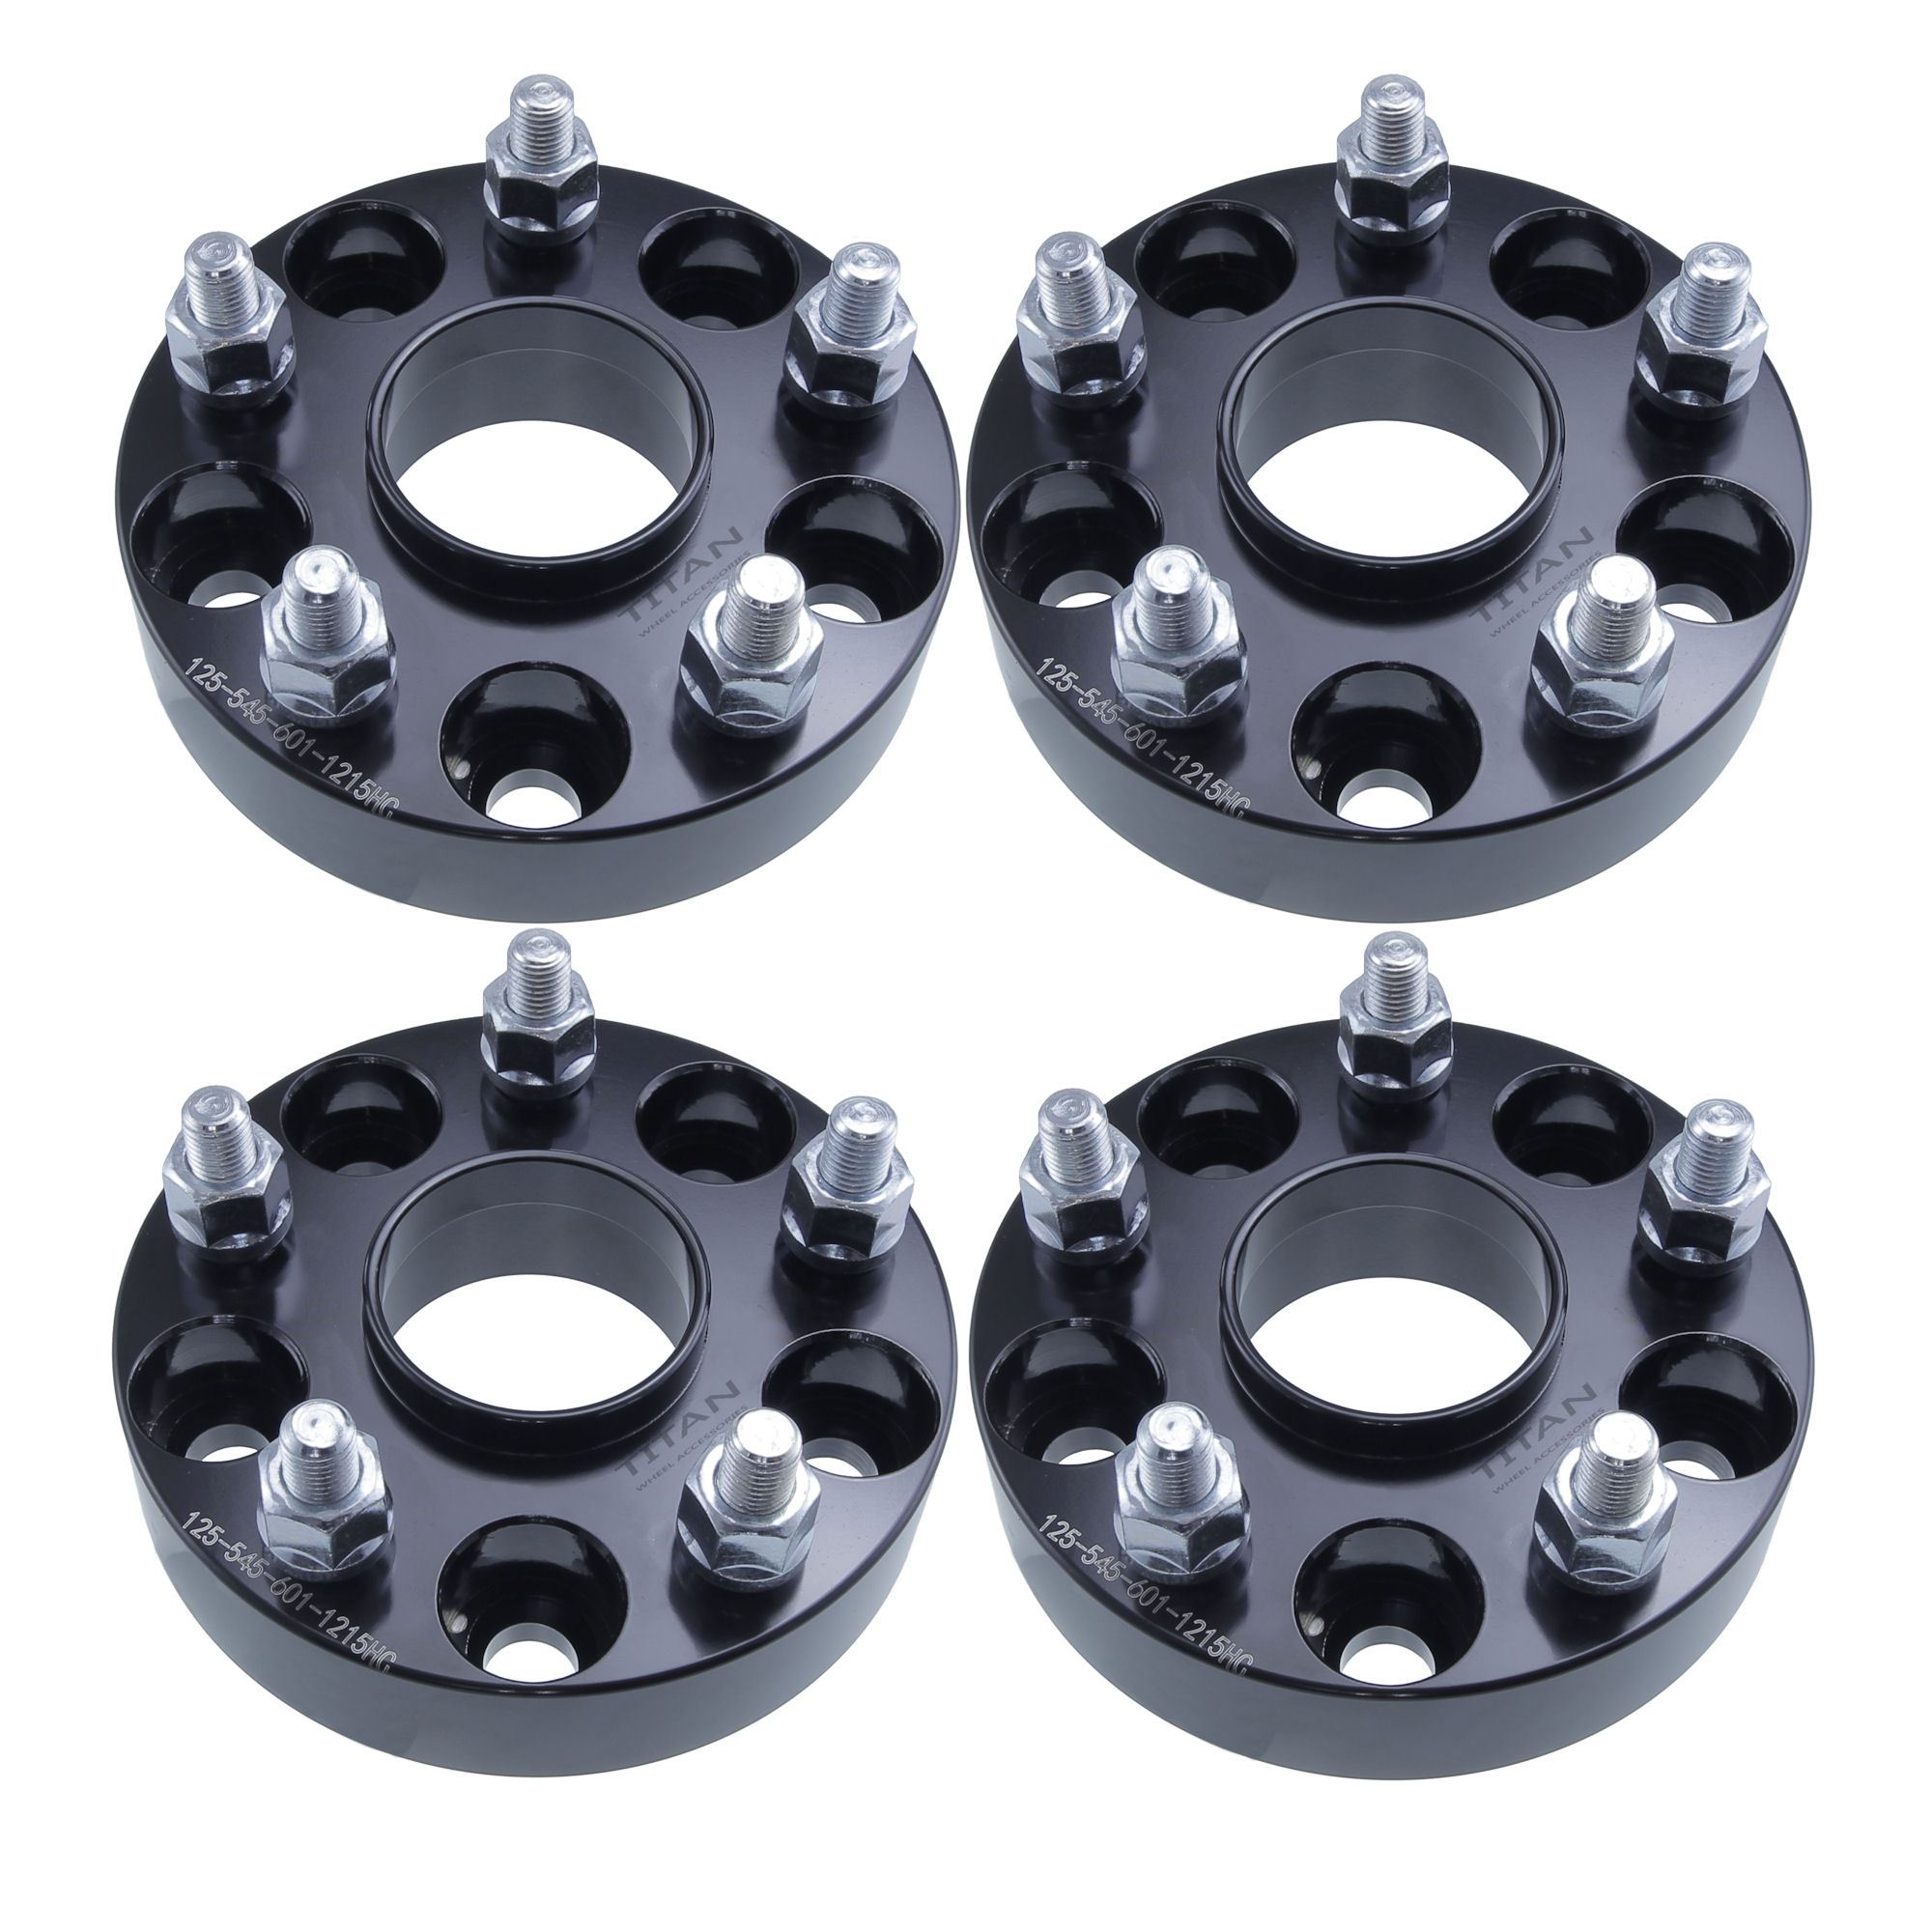 2 Inch Hubcentric Wheel Spacers for Acura TSX TL Honda Civic